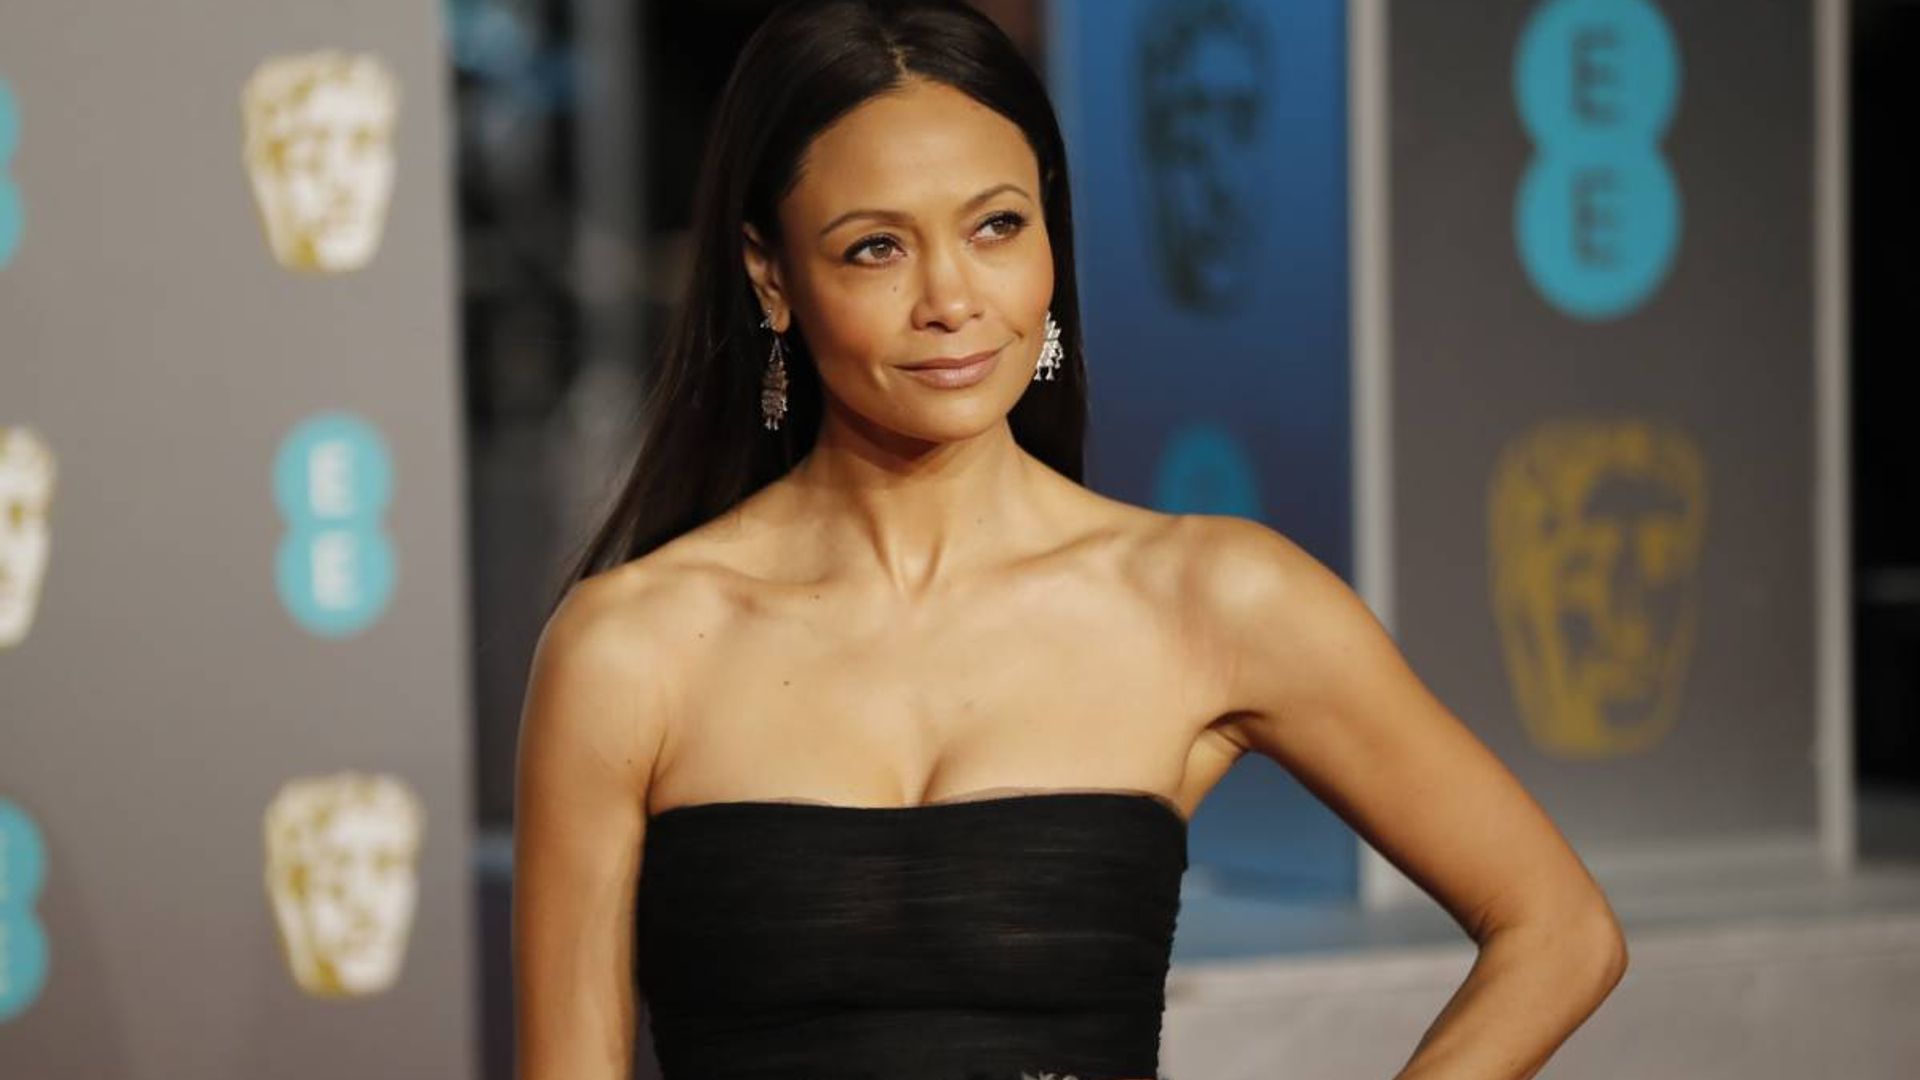 Thandie Newton’s stunning daughter is her double in a striking look you would never expect